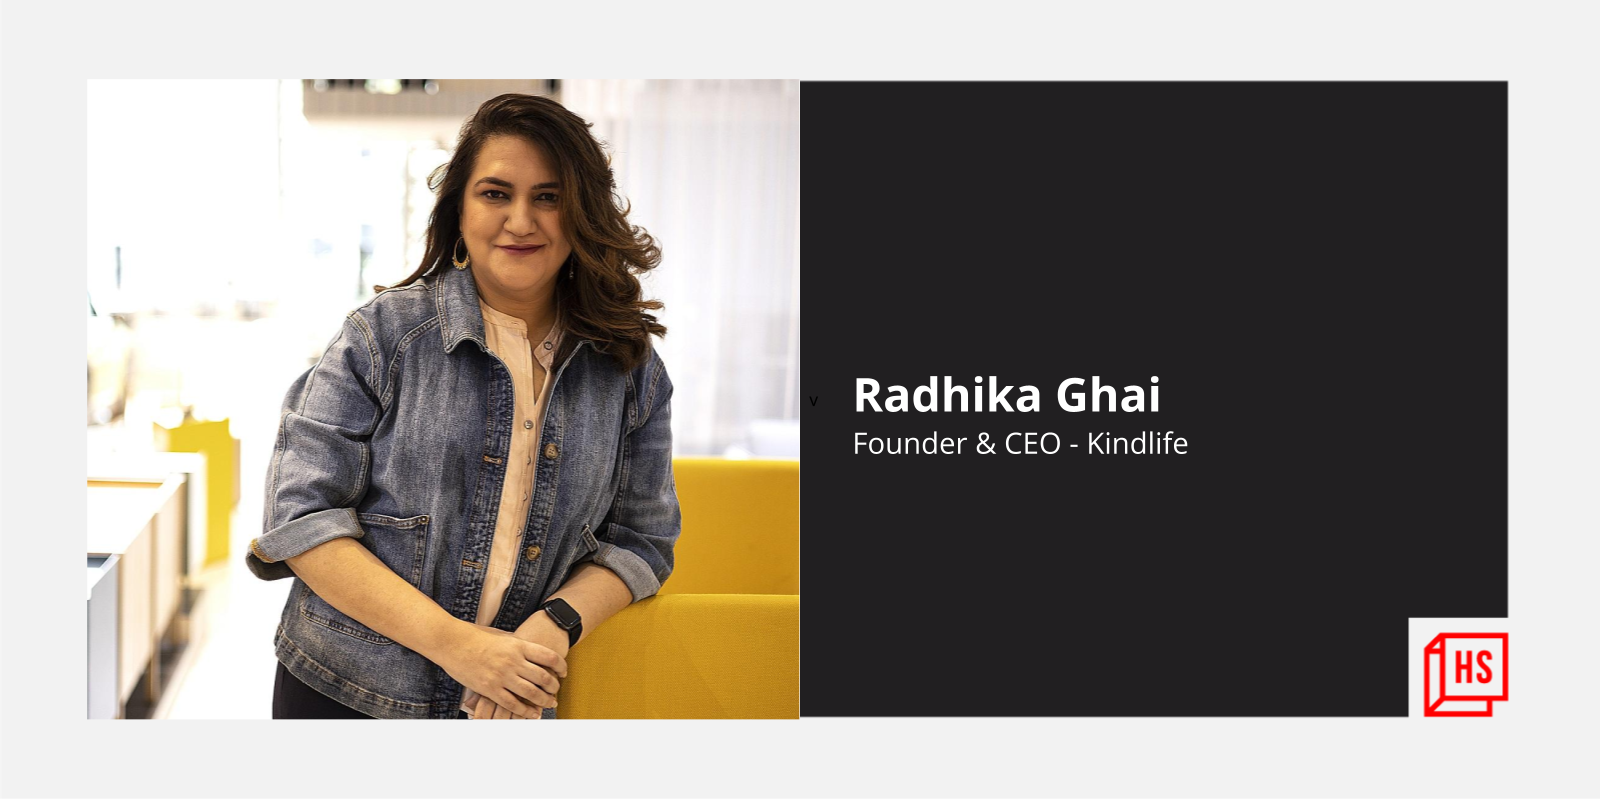 After unicorn ShopClues, Radhika Ghai enters wellness space with Kindlife targeting Gen Z